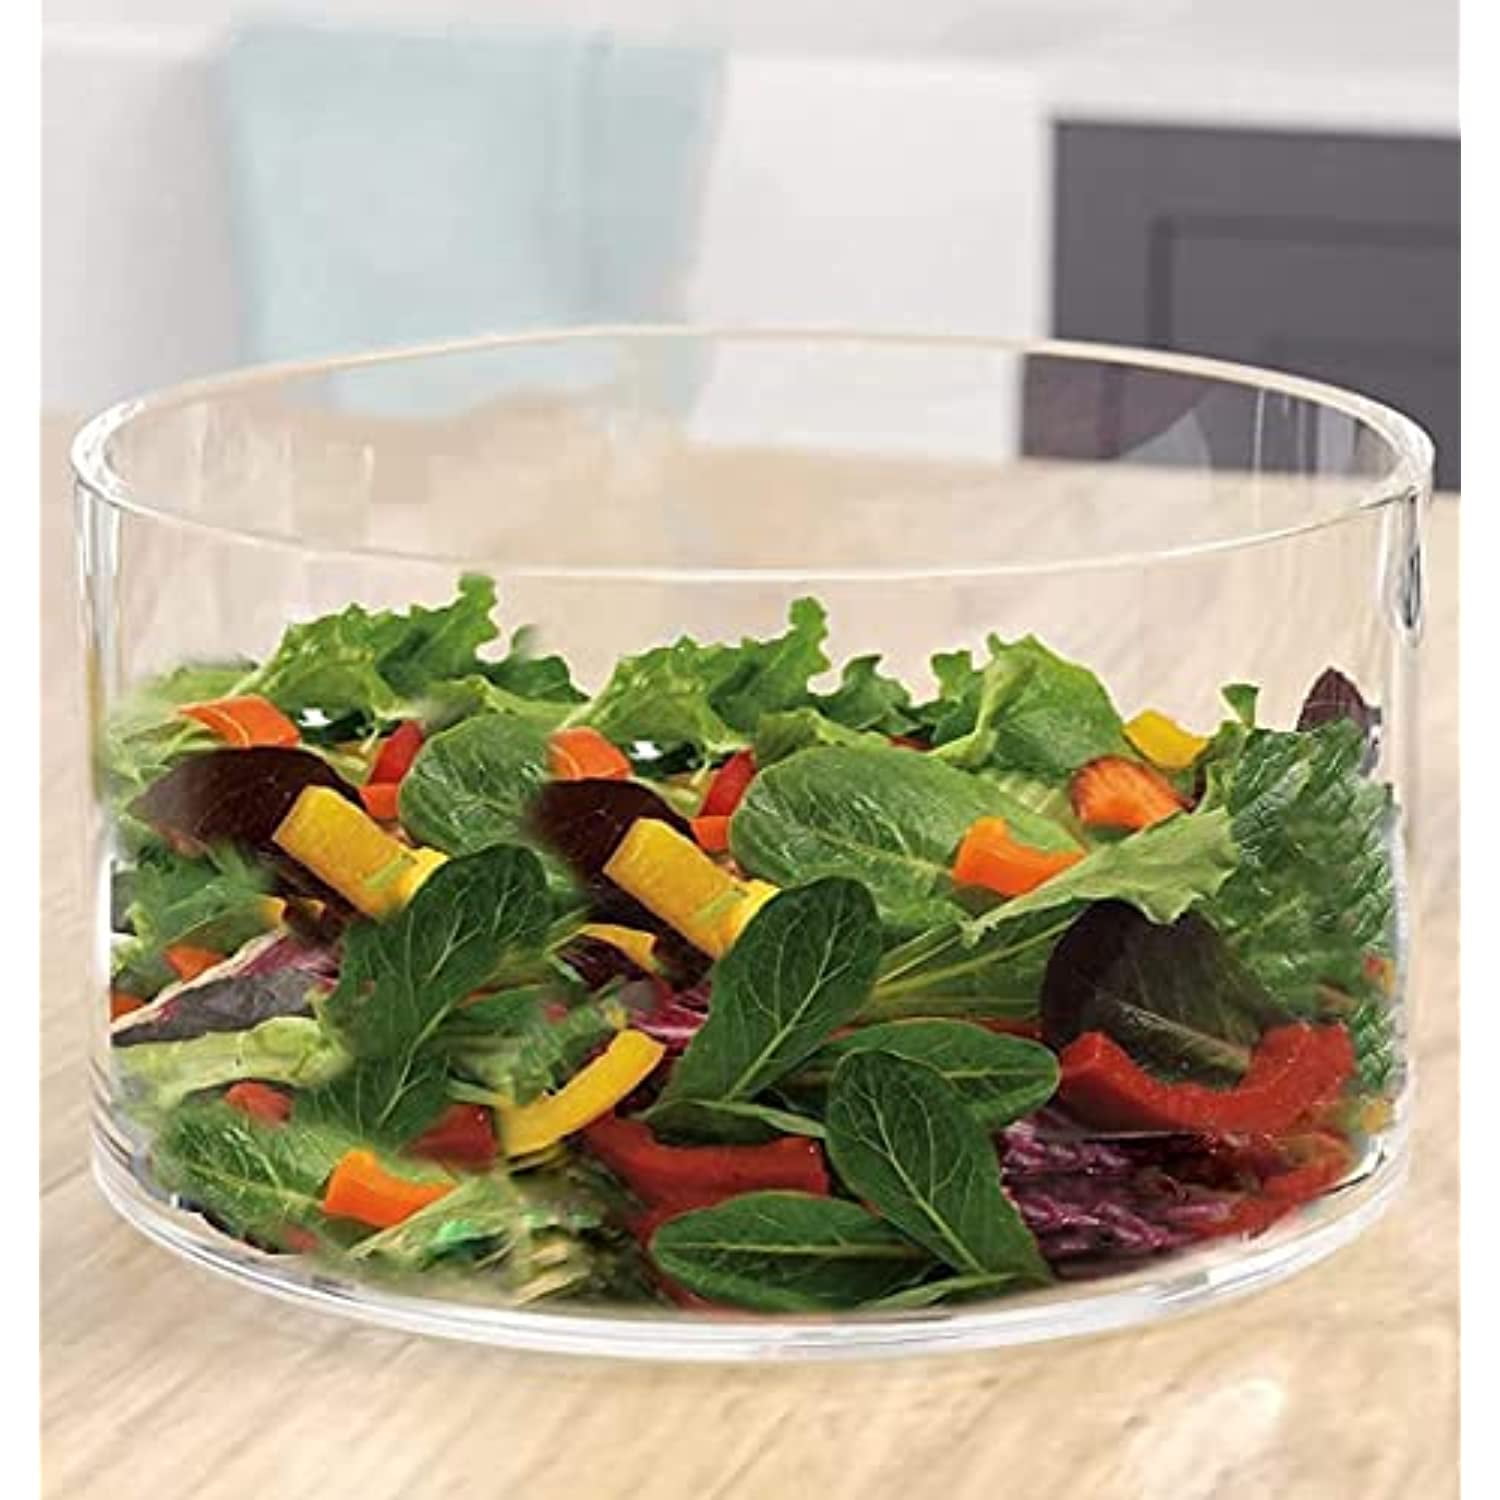  S'well Stainless Steel Salad Bowl Kit - 64oz, Azurite - Comes  with 2oz Condiment Container and Removable Tray for Organization -  Leak-Proof, Easy to Clean, Dishwasher Safe : Sports & Outdoors